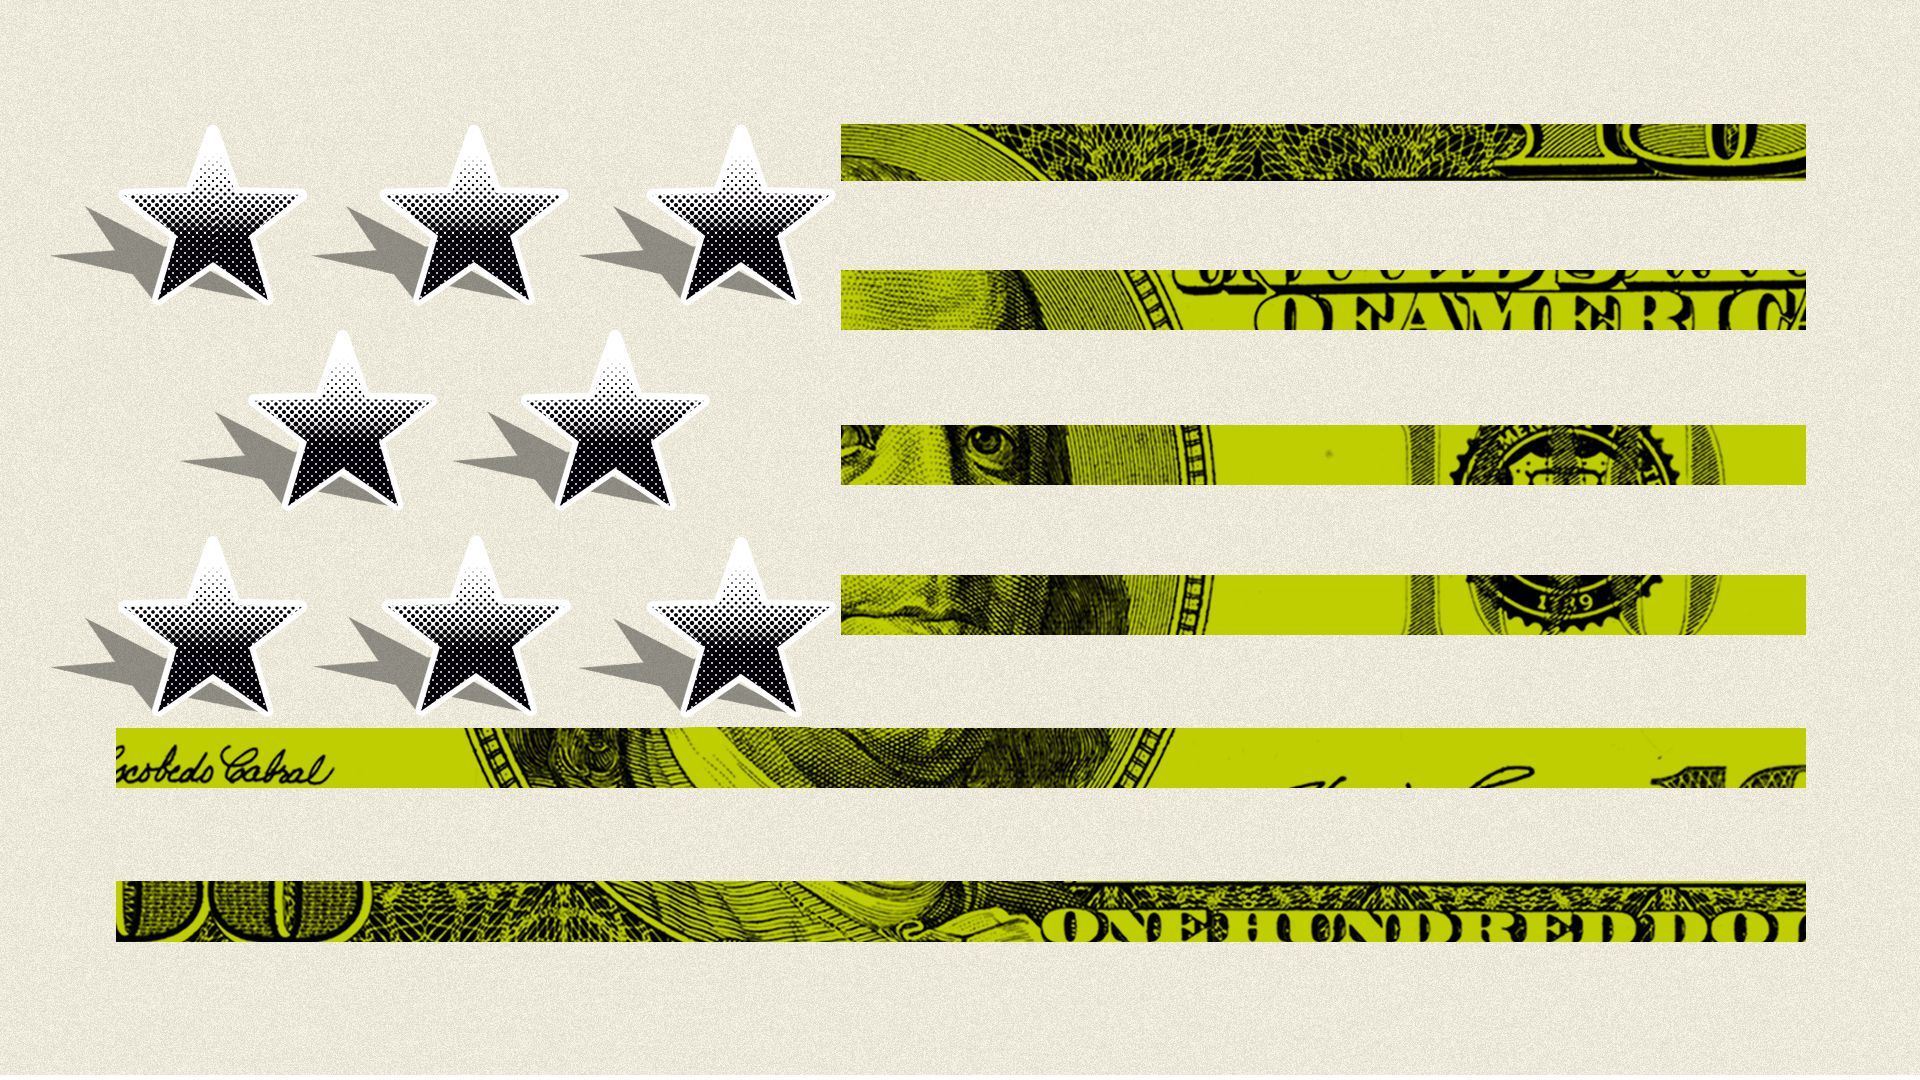 Illustration of a U.S.-like flag with stars and stripes made out of a hundred dollar bill